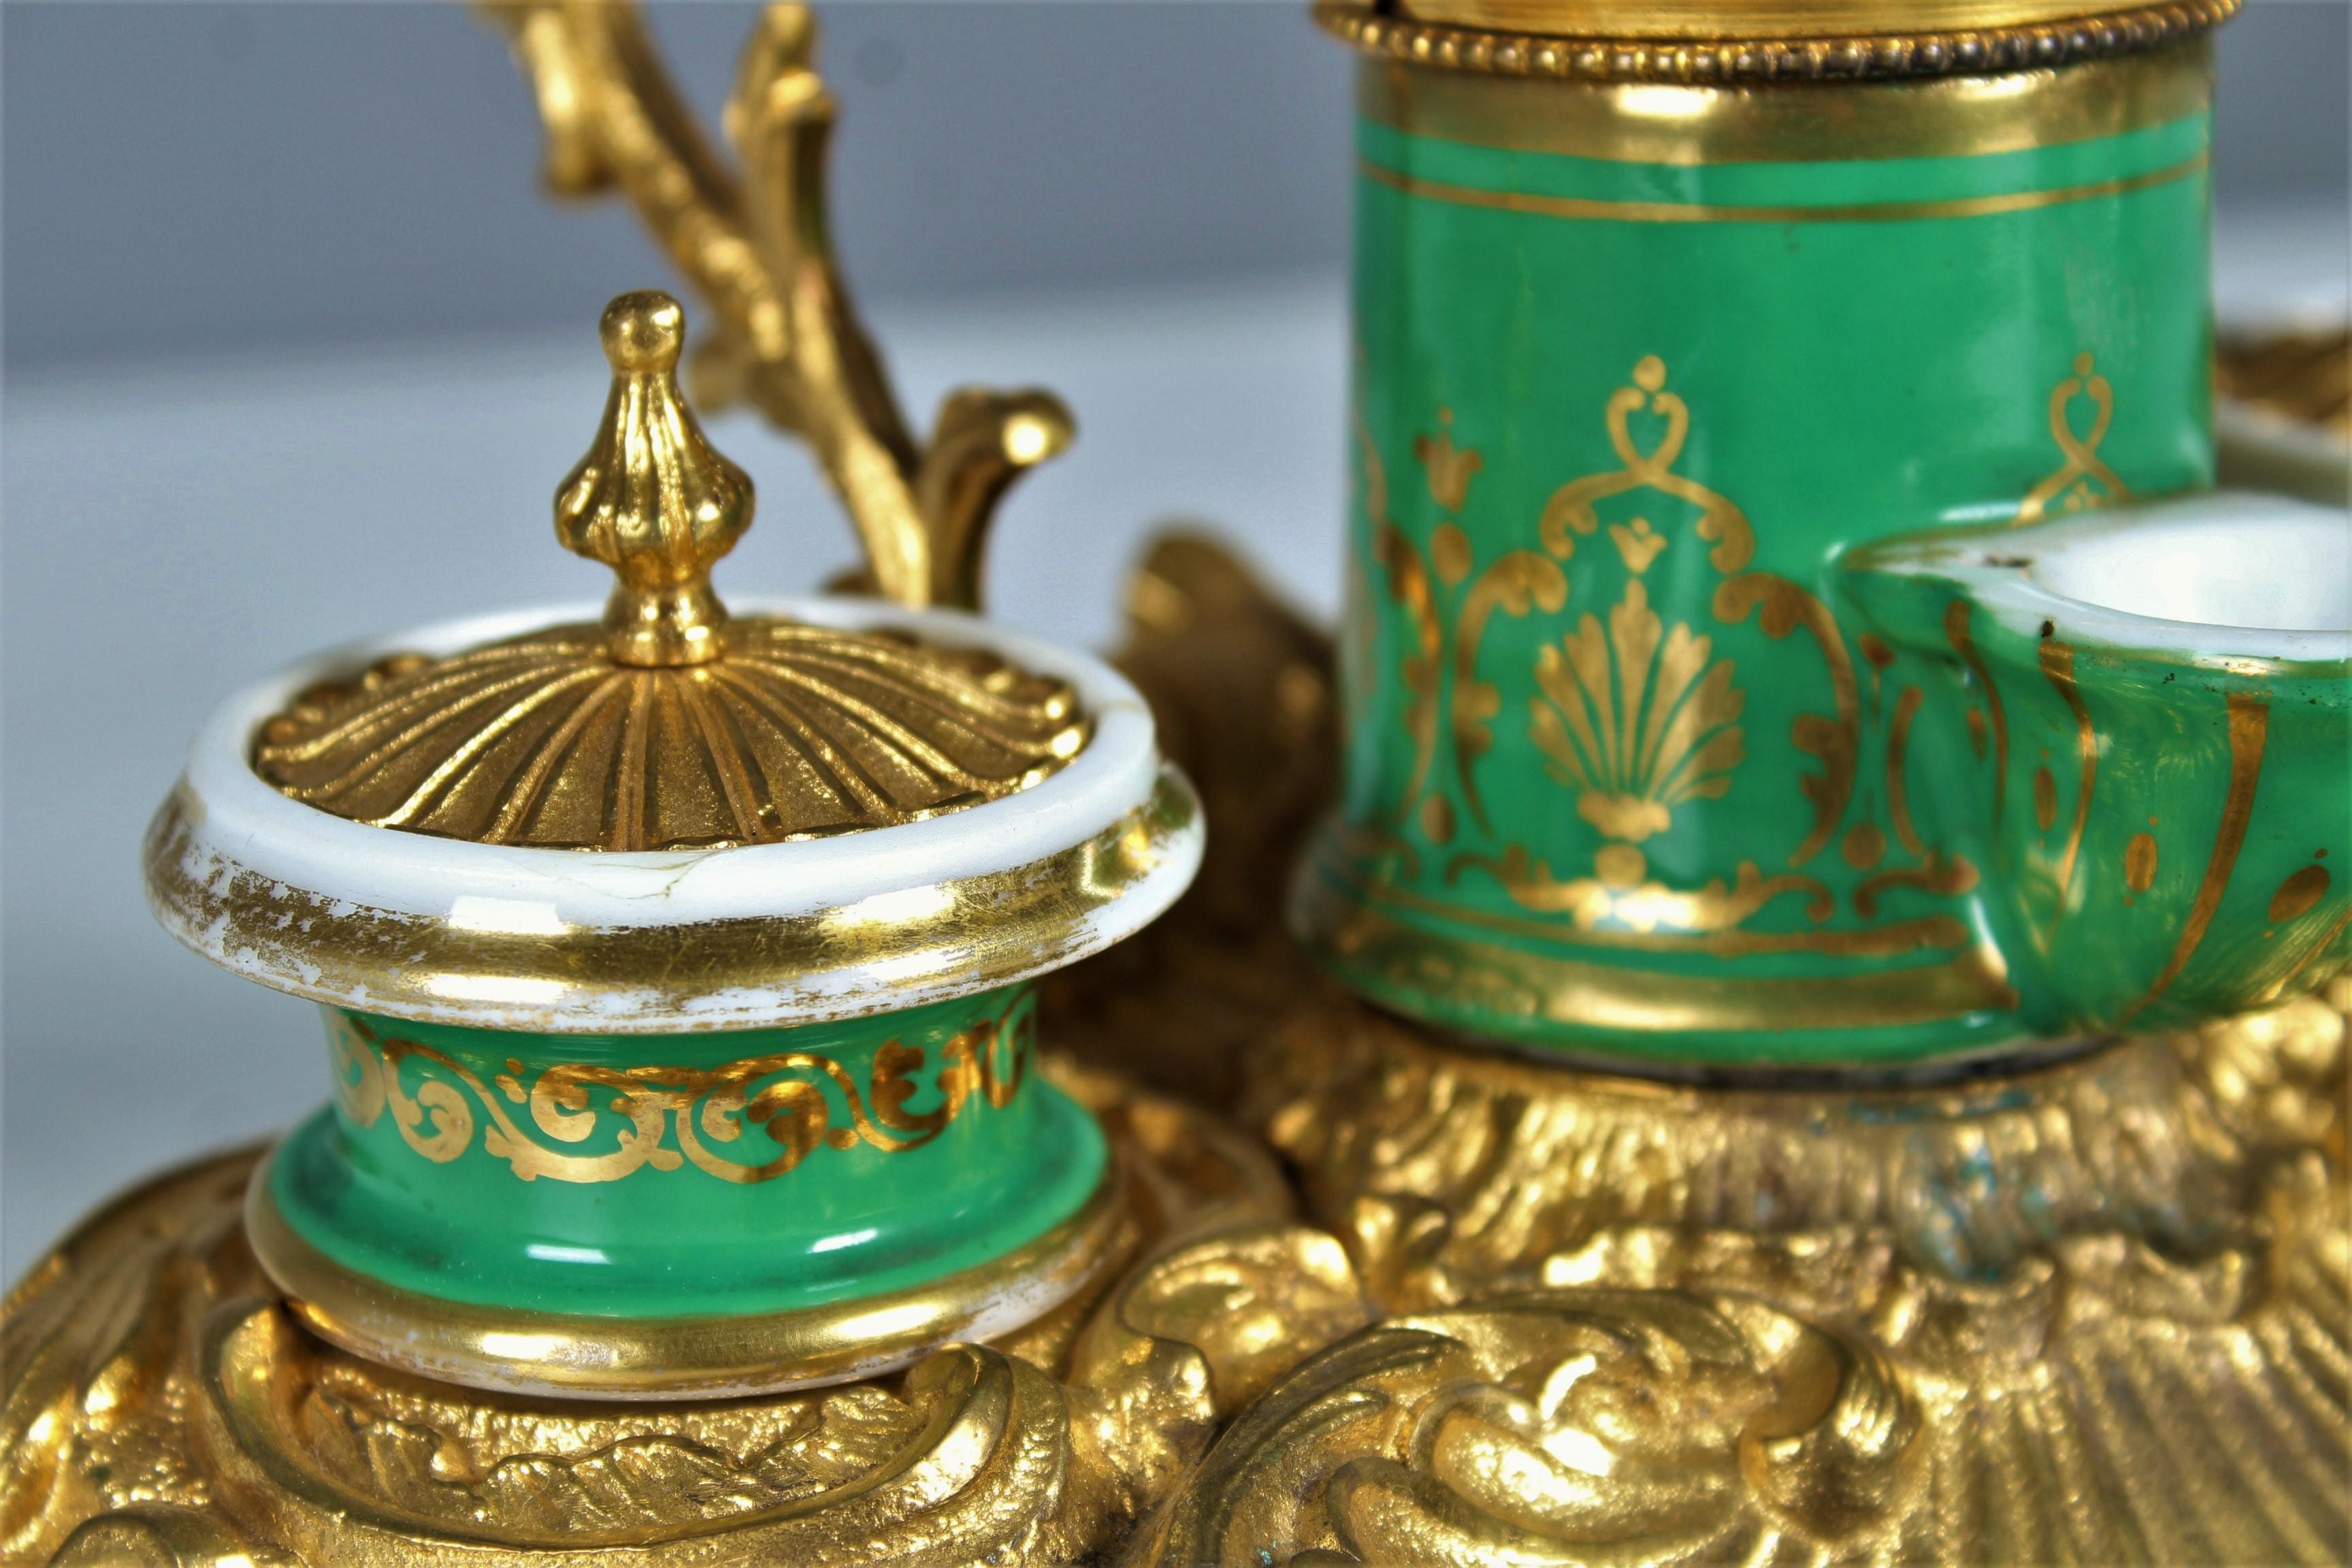 19th Century Antique Inkwell from Bronze and Ceramic, France, circa 1880, Louis XV Style For Sale